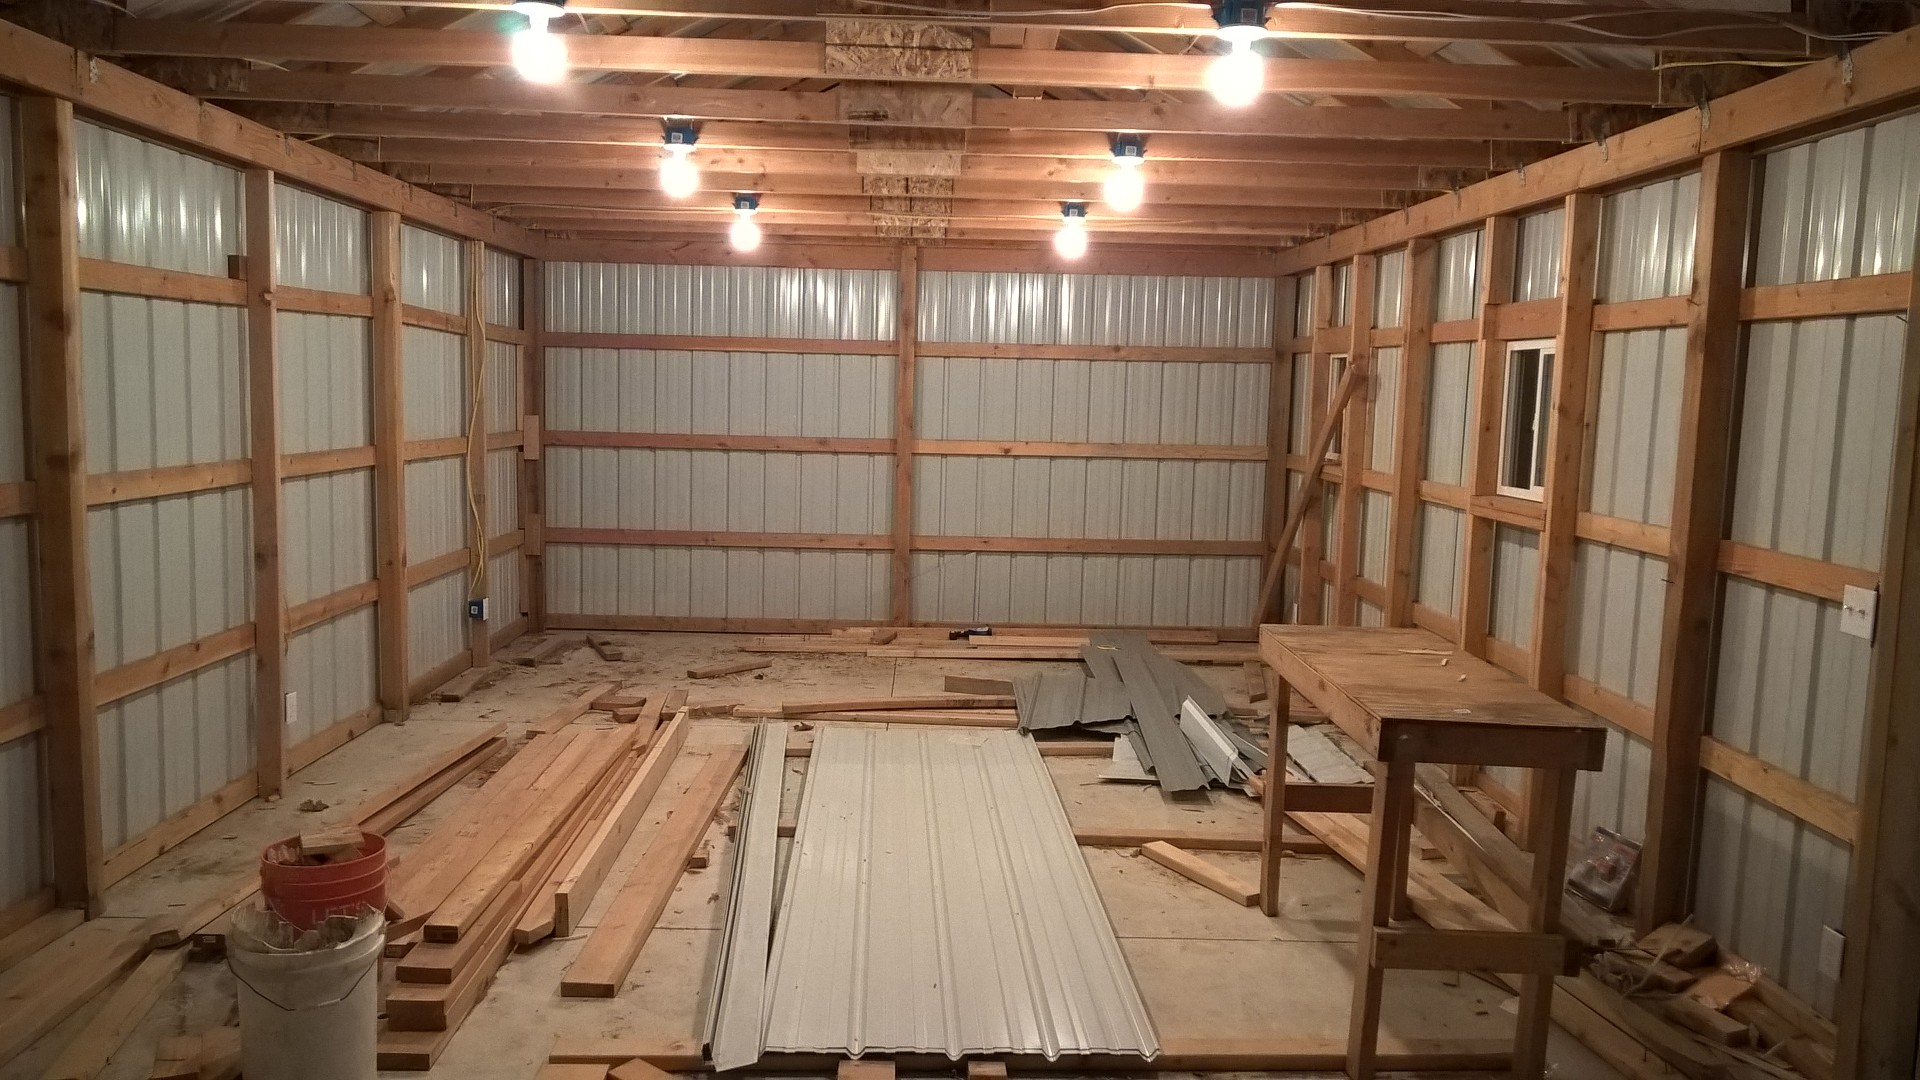 building a pole barn shed from scratch p4 – planning pole